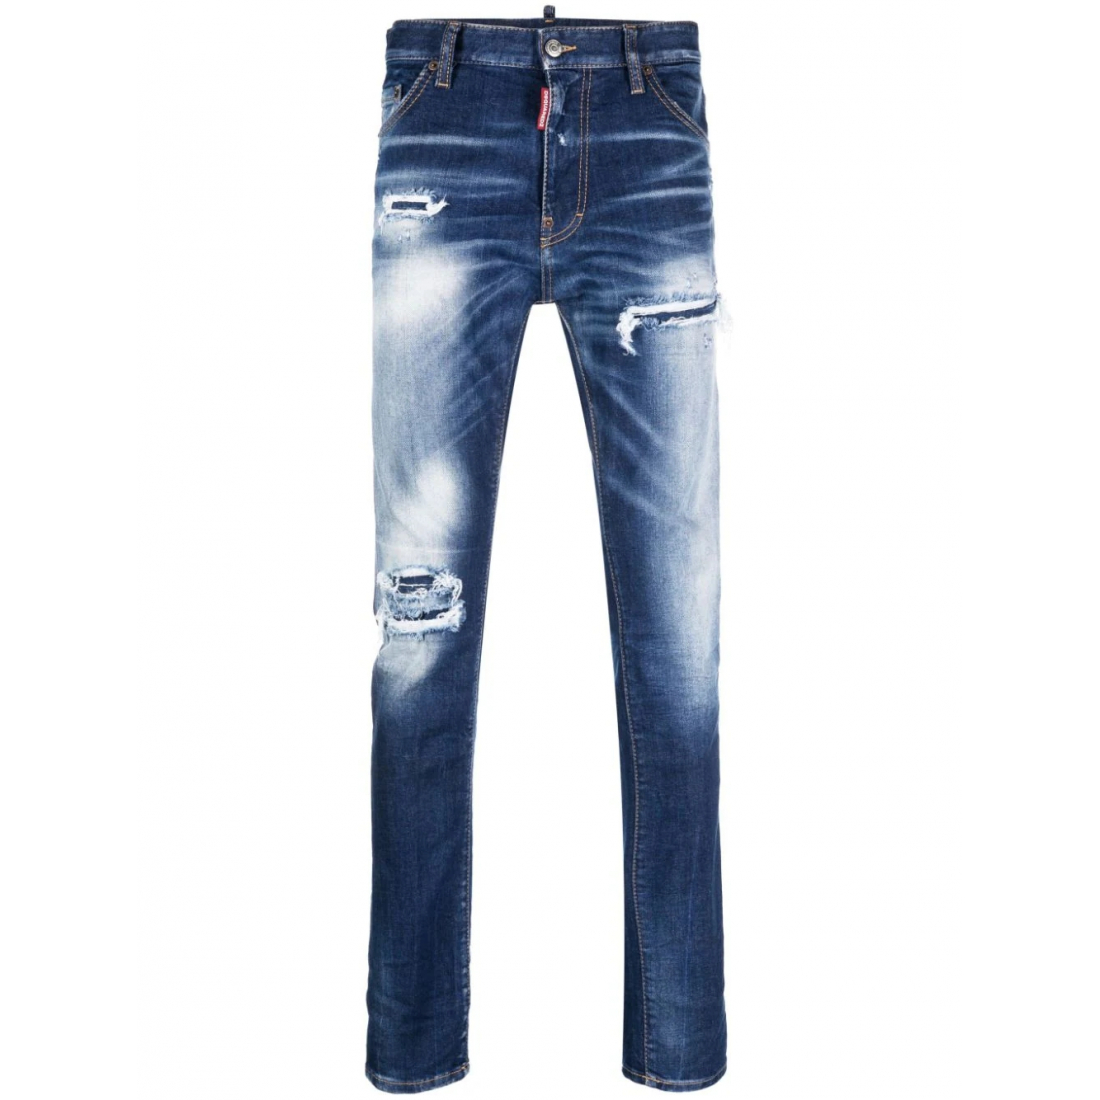 Men's 'Cool Guy Distressed' Jeans